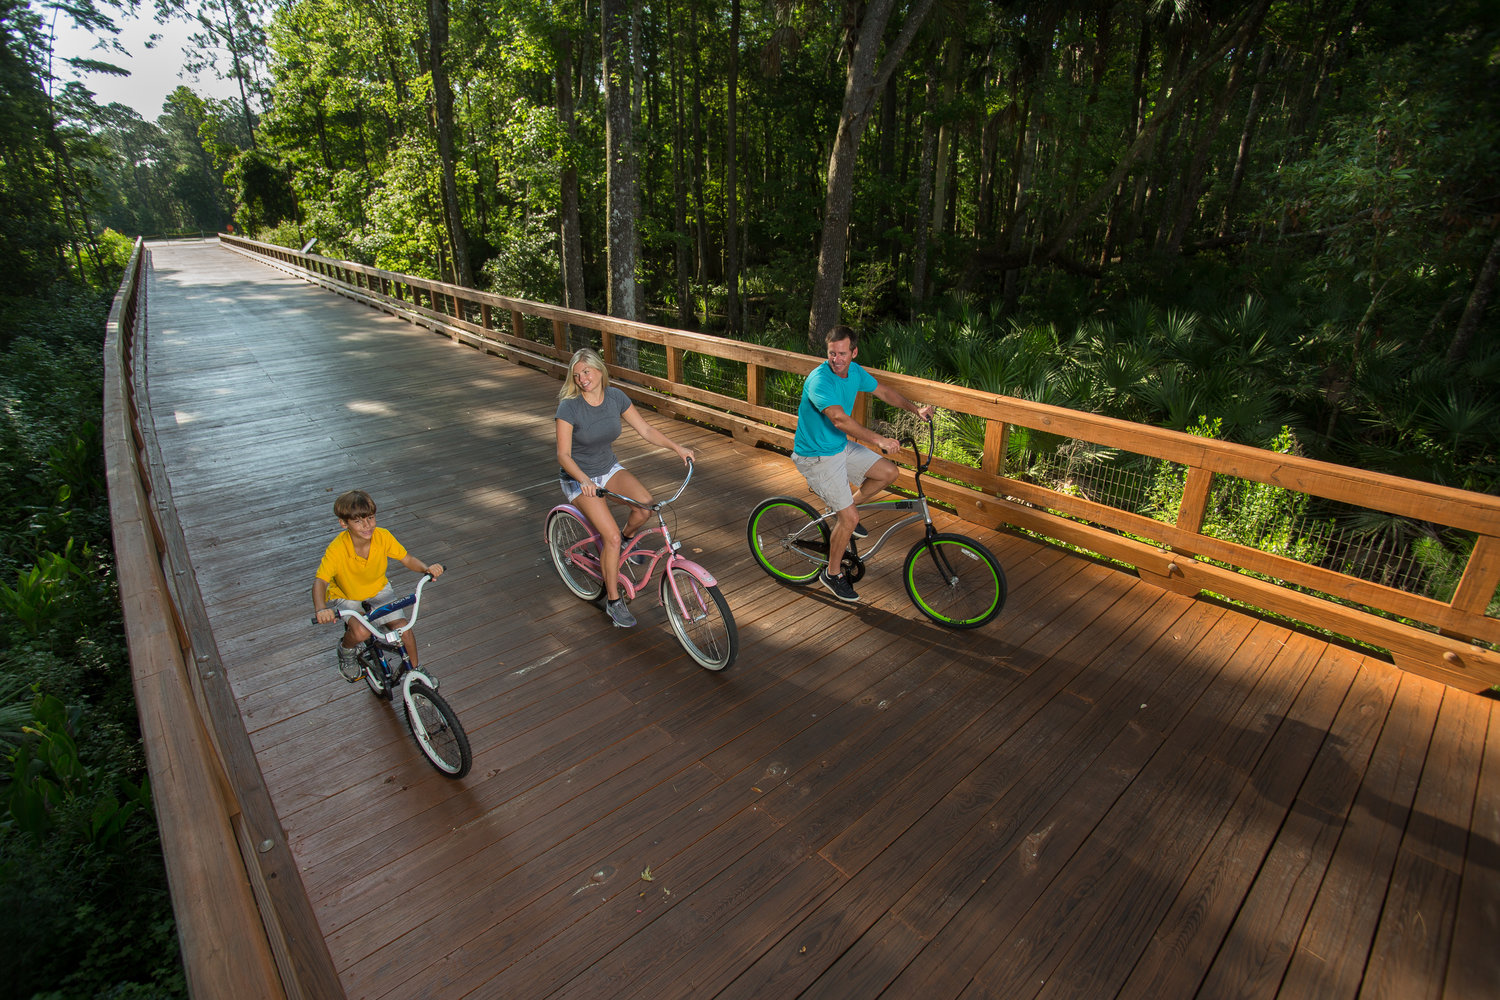 Nocatee is a family-friendly community with ample opportunities to enjoy the outdoors.